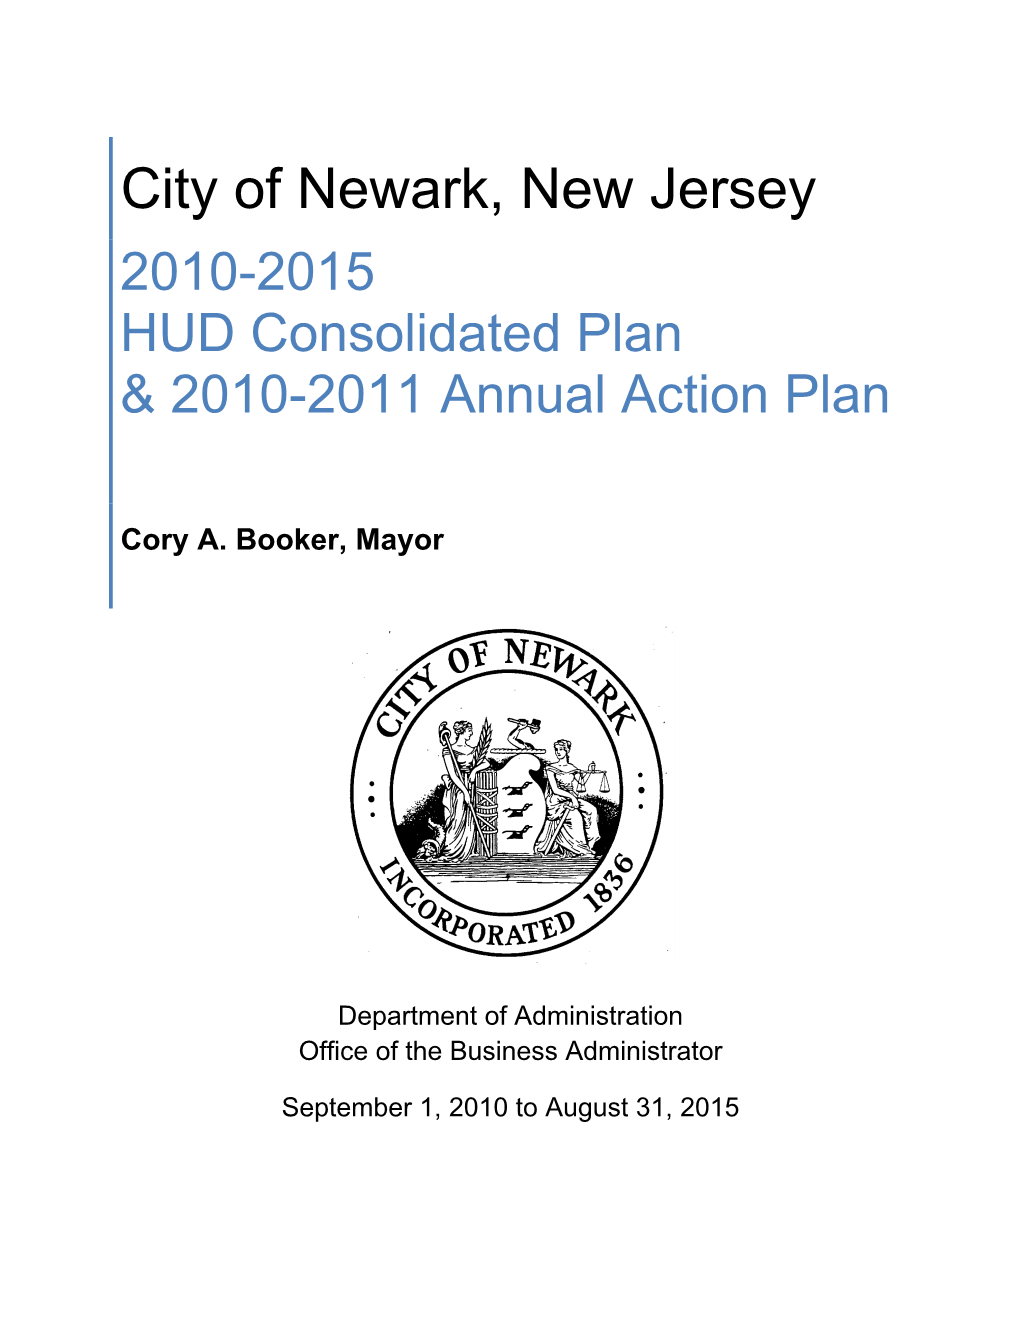 City of Newark, New Jersey 2010-2015 HUD Consolidated Plan & 2010-2011 Annual Action Plan